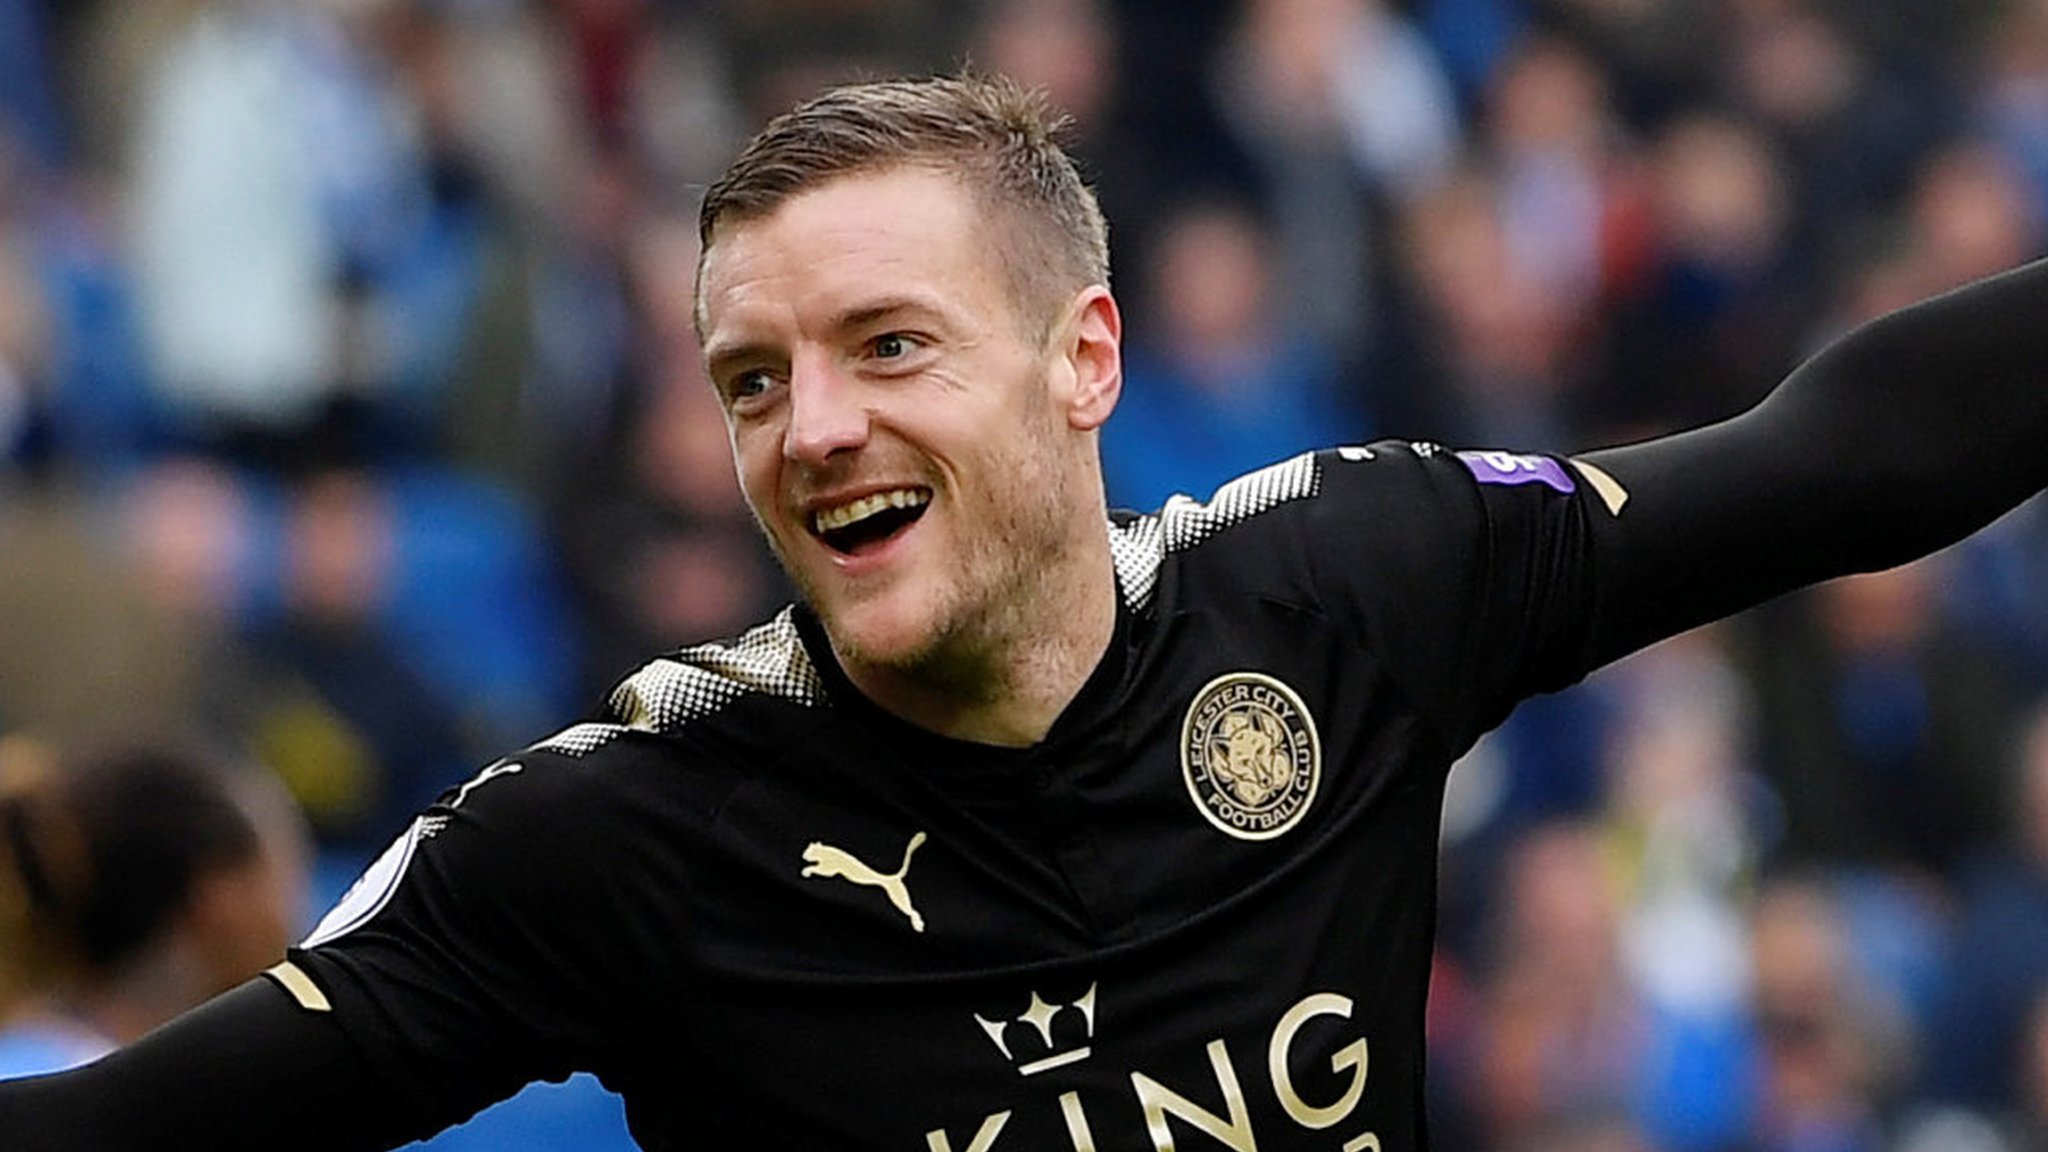 Atletico Madrid planning shock move for Vardy - gossip